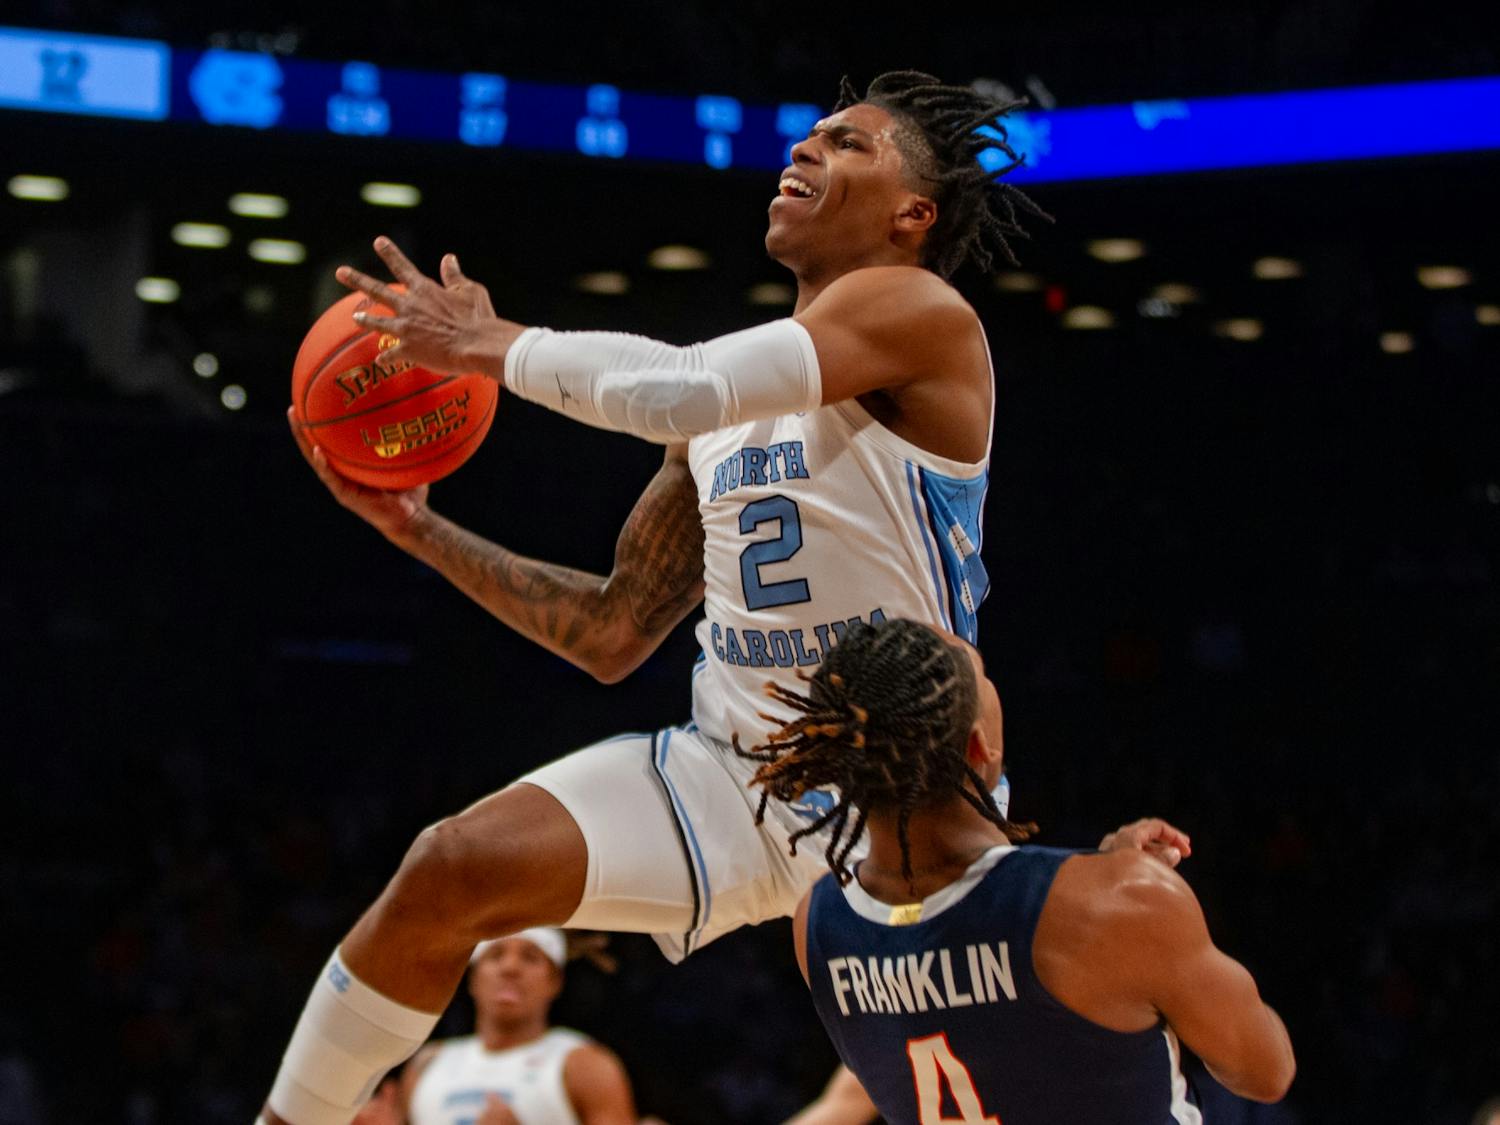 Sophomore guard Caleb Love (2) prepares to dunk the ball at the quarterfinals of the ACC men's basketball tournament against UVA at the Barclays Center on March 10, 2022. UNC won 63-43 and will be moving on to the semifinals.